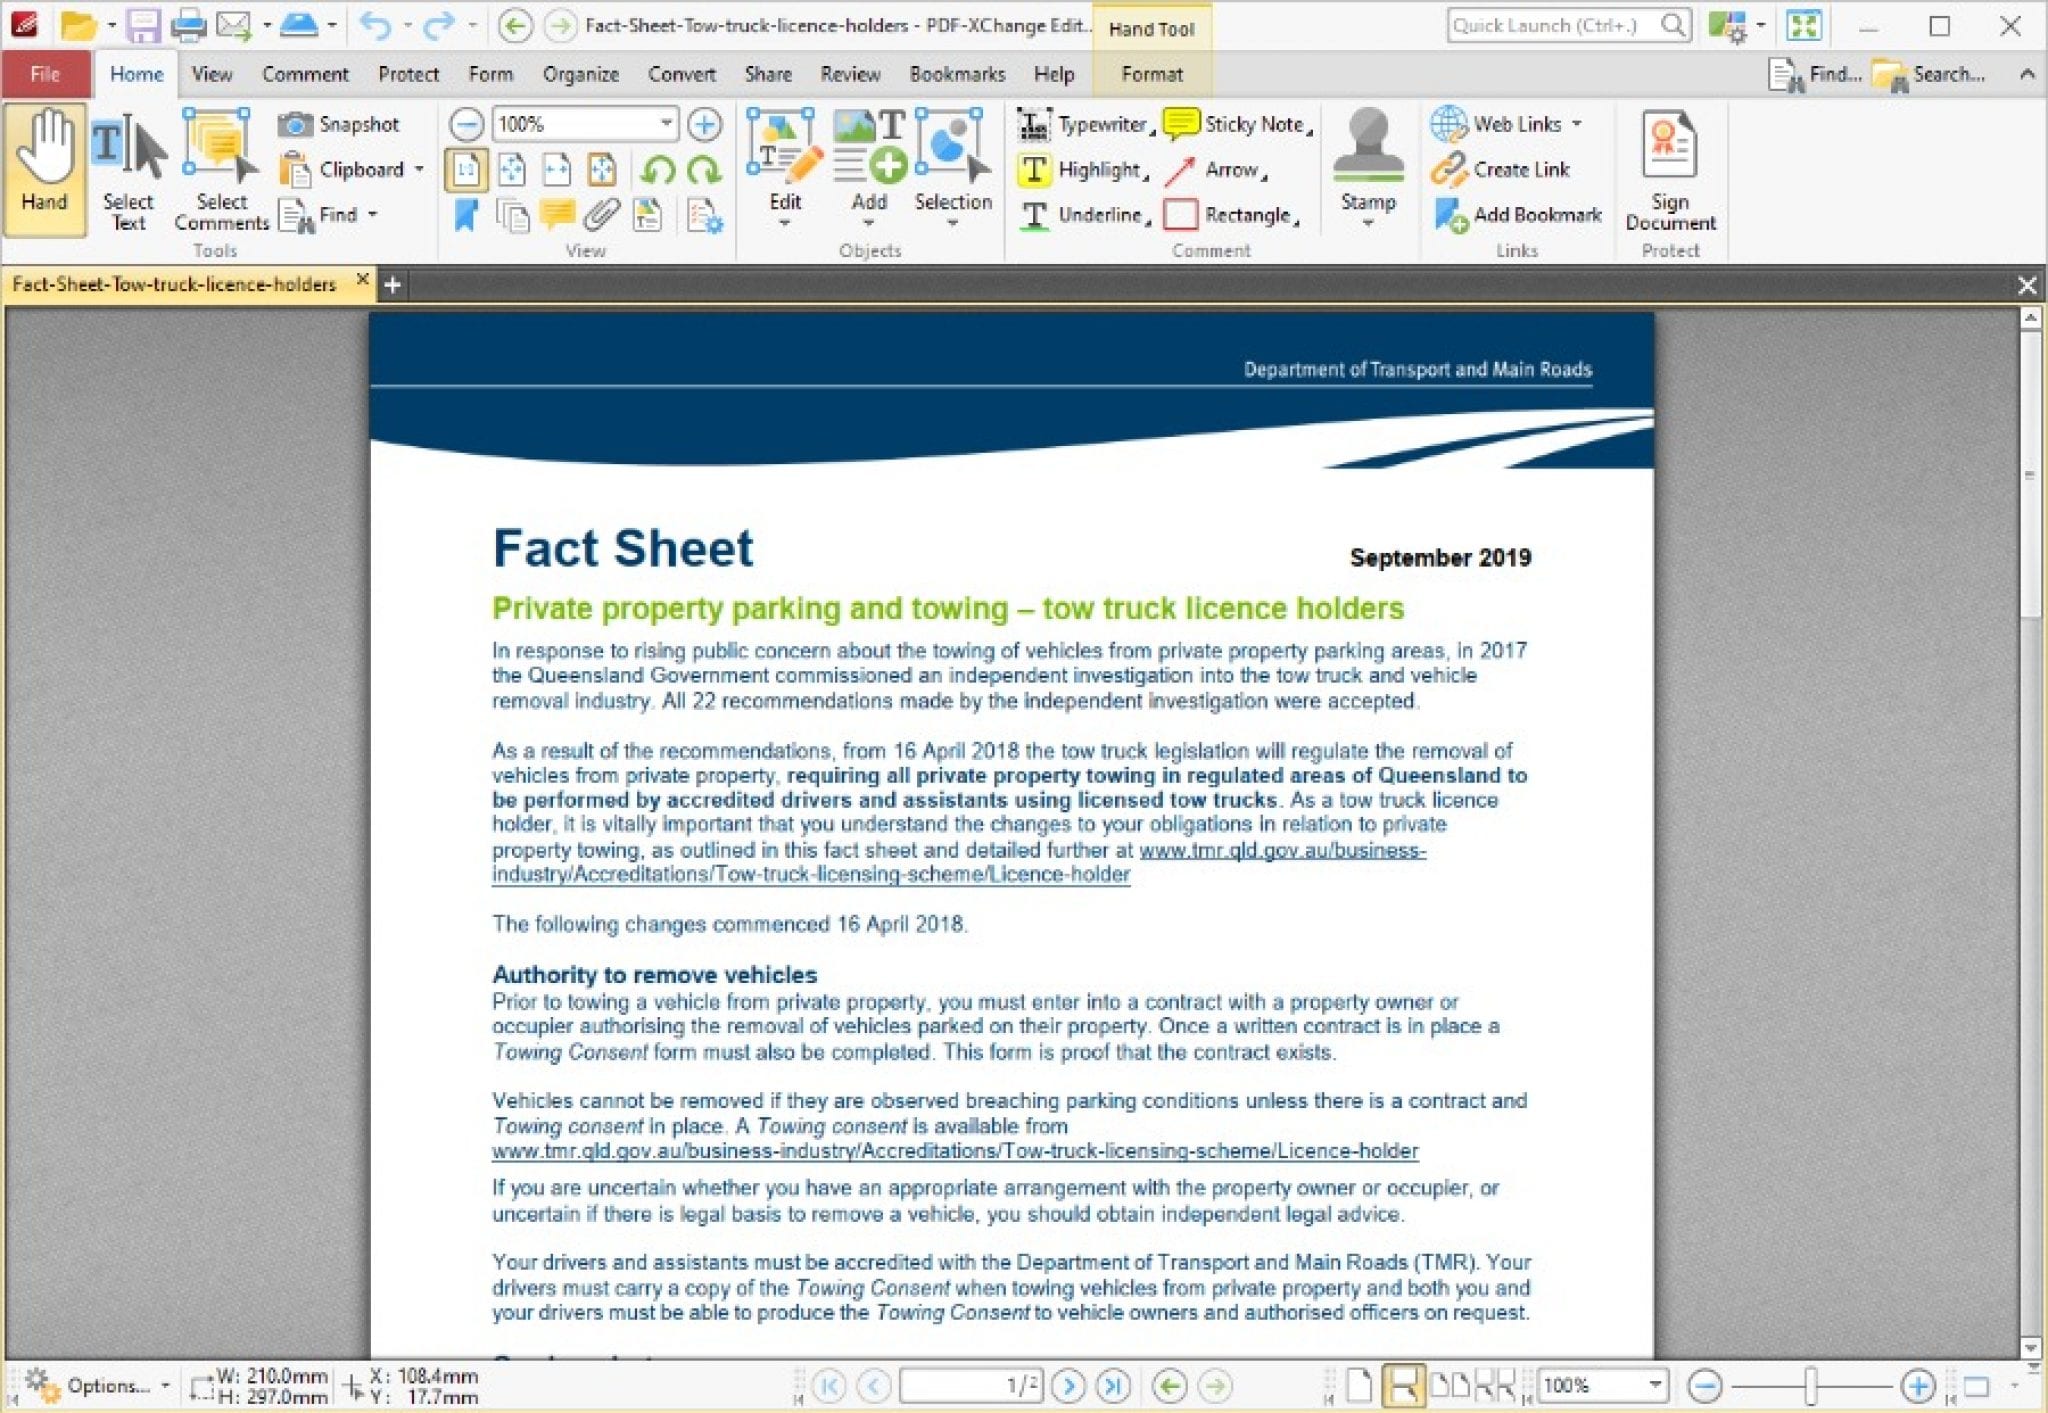 best free pdf editor and reader